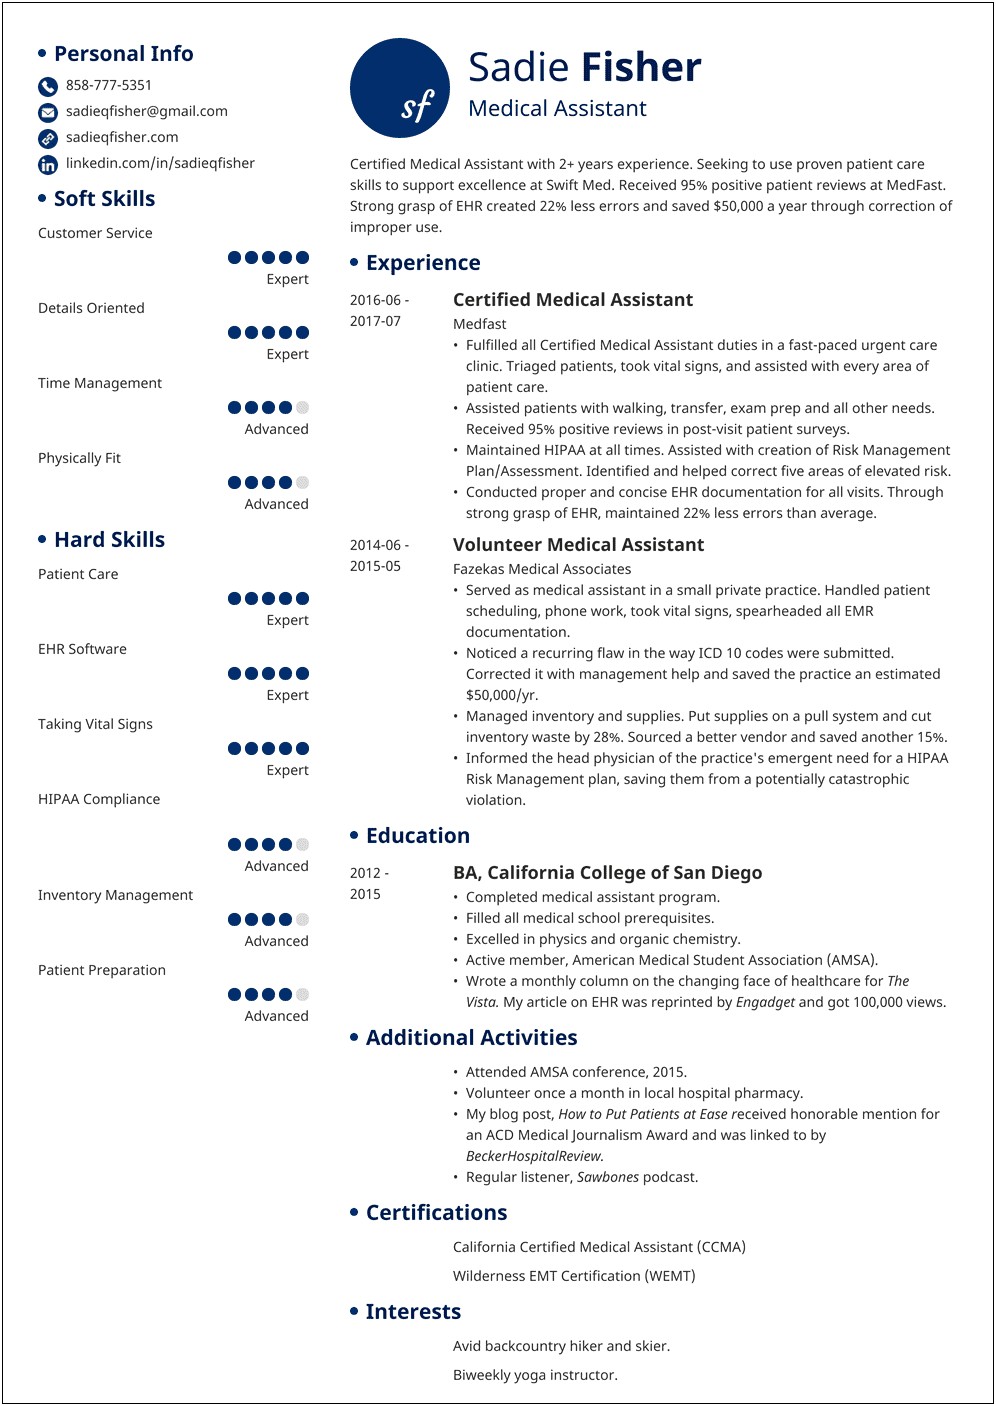 Medical Assistant Resume Objective Examples Monster.commonster